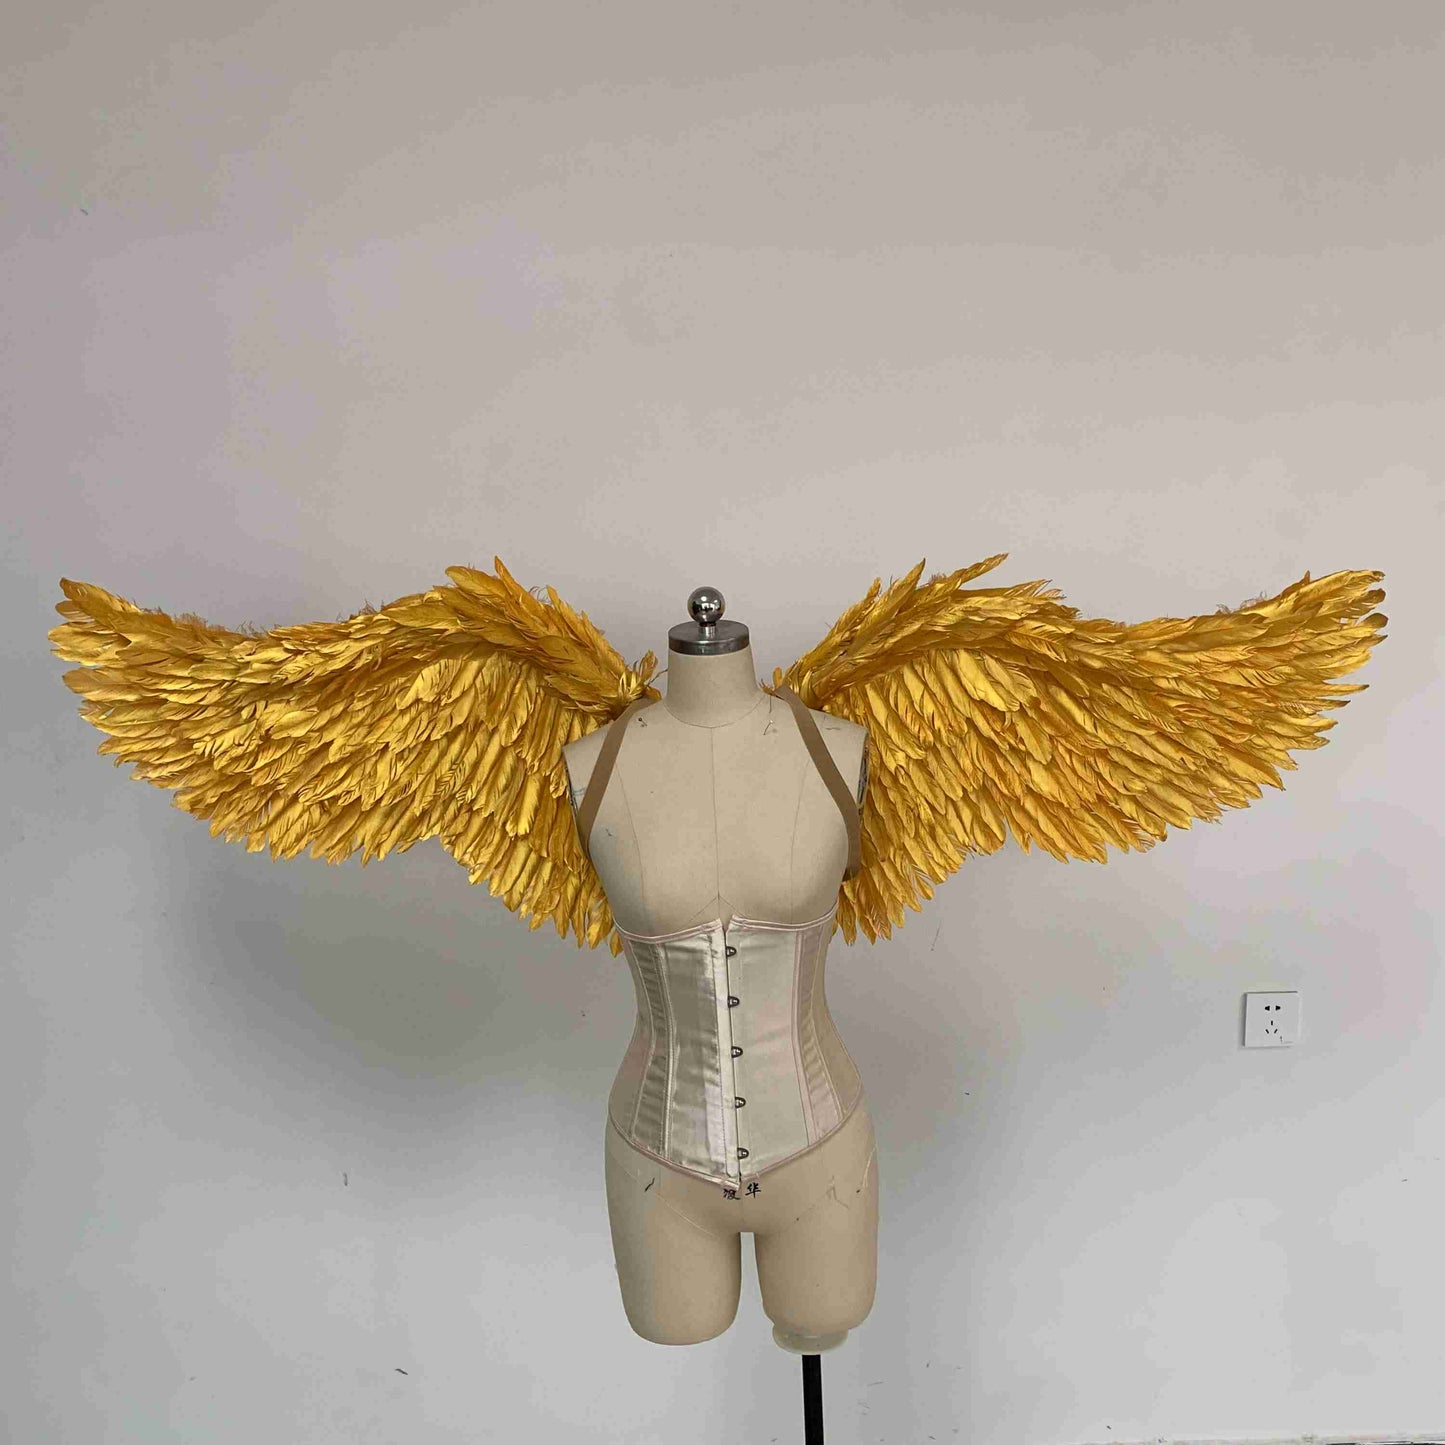 Our small golden angel wings from the front. Made from goose feathers. Wings for angel costume. Suitable for photoshoots.